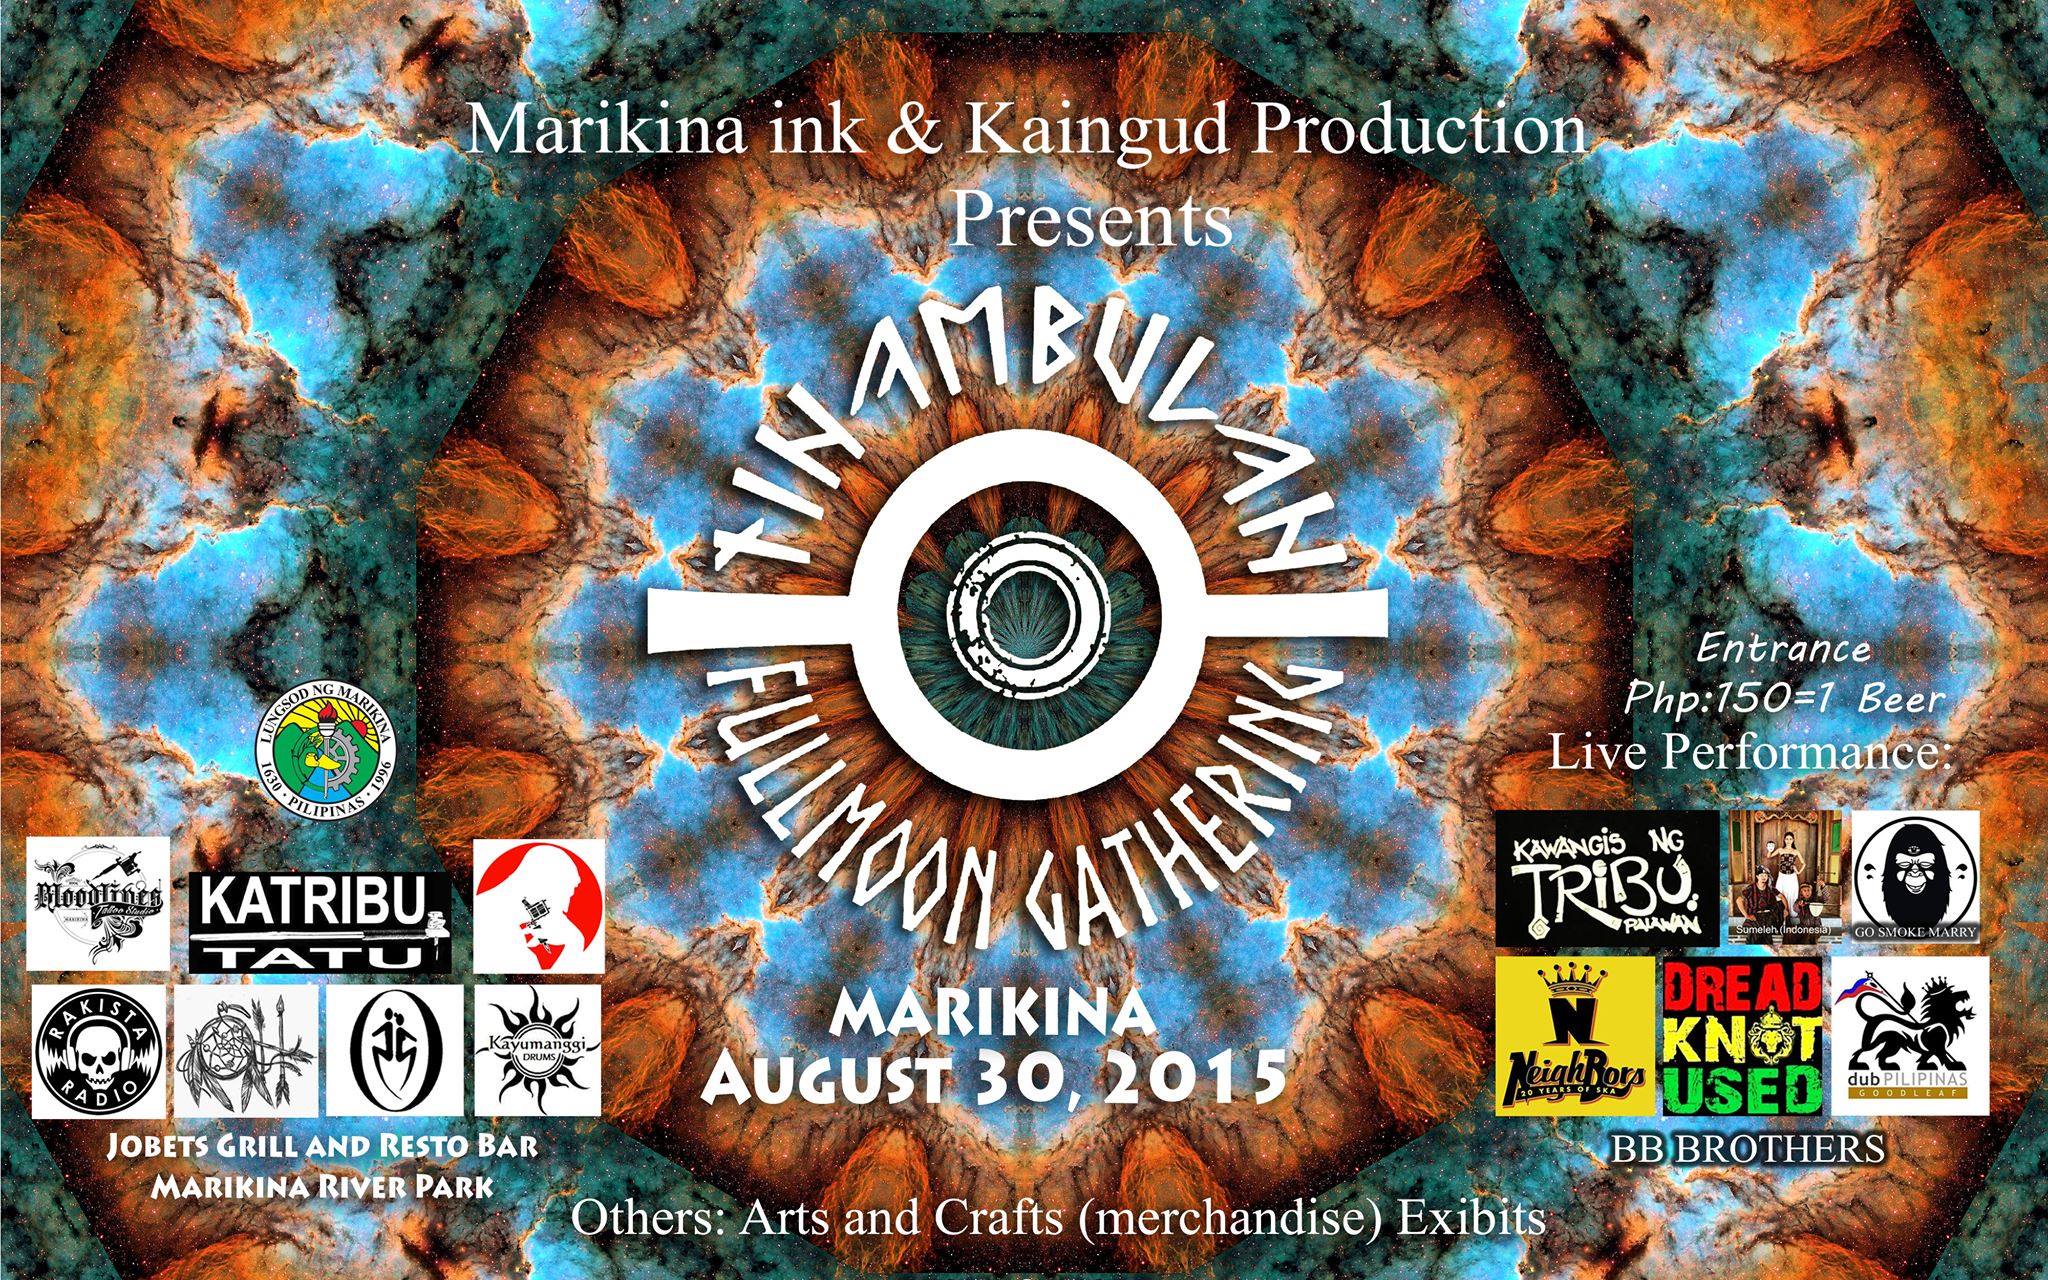 Tinambulan Fullmoon Gathering (Marikina) August 30, 2015 Jobets Grill and Resto Bar Marikina River Park Activities: (3PM) Workshops Basic Introduction to Hand Drumming Workshop by Kawangis ng Tribu Dream Catcher Making by Cherry Oh Tattoo Exhibit (Traditional Hand Tapping) by Katribu Tattoo Basic Baybayin Workshop by Diyaki Alyana -Event Proper- Live Performances: 6PM Sumeleh (Traditional Indonesian Ritual) 6:30 Drum Circle (Open for all Hand Drum Enthusiast) 8PM Neighbors Ska 8:45 BB Brothers 9:15 Corvus 10PM GoodLeaf 10:45 Kawangis Ng Tribu 11:30 Go Smoke Mary 12:15 Dreadknot Used Simultaneous Beats By: DJ Togoe DJ Kyle Garon Brought to you by: Kawangis ng Tribu #taosagubat Kaingud Production @kaingudcrafts Marikina Ink Prod. by Bloodlnes #thisisbloodlines #ryandante The City Govt of Marikina Special Thanks to: Kaingud Arts and Crafts Cherry OH Katribu Tatu Dopey Boi KAYUMANGGI DRUMS.... Philippine Djembe Community Tambol Bayan thINK Tattoo Studio Spot Color print shirts and decals Rakista Radio Stay tuned for more updates! Aawwwooohhh!!!